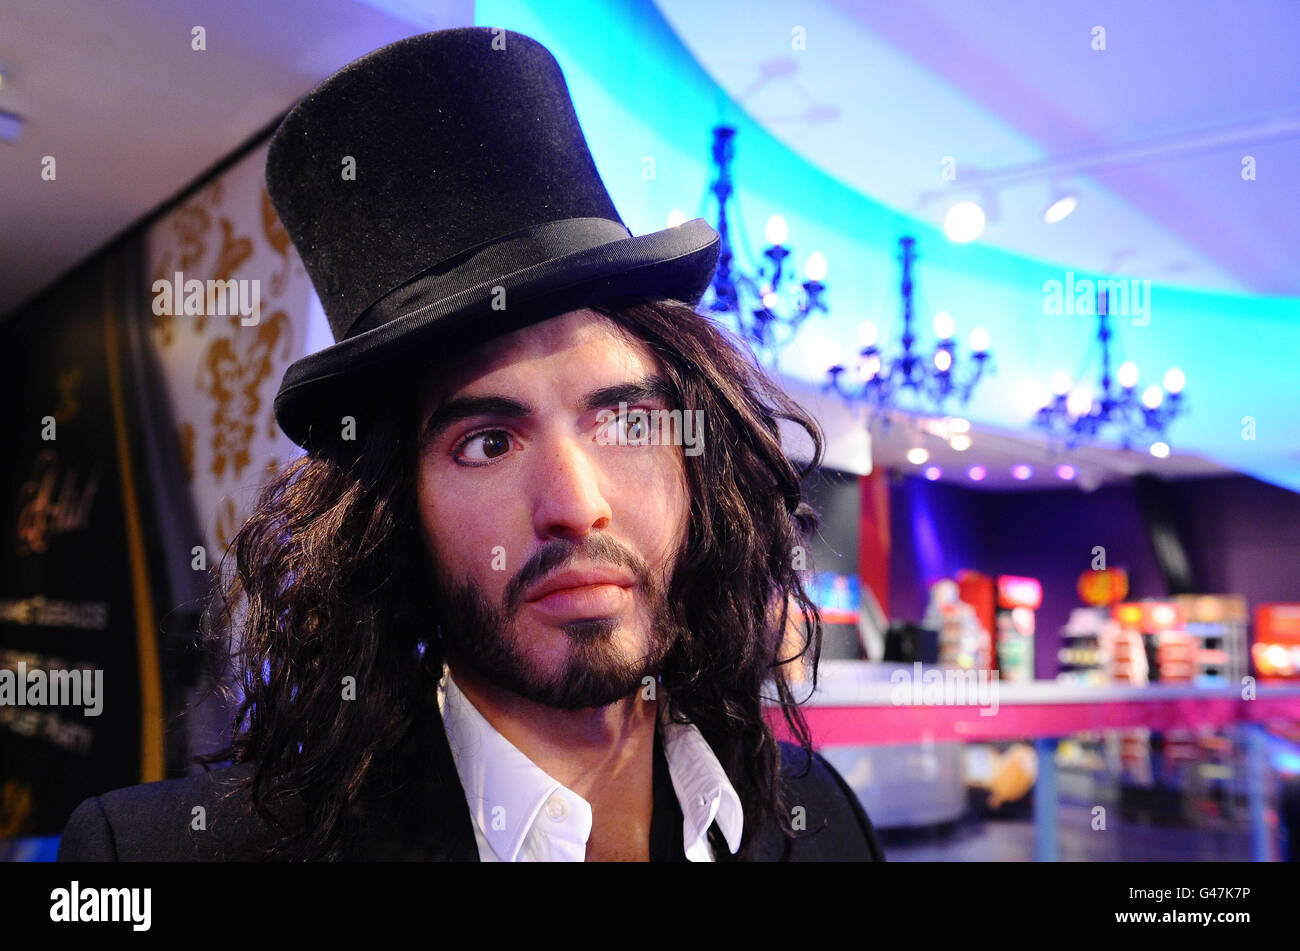 The Russell Brand waxwork at Madame Tussards in London, is dressed in top hat, cane and black dinner jacket to celebrate his role in the upcoming movie Arthur, a remake of the Dudley Moore film. Stock Photo